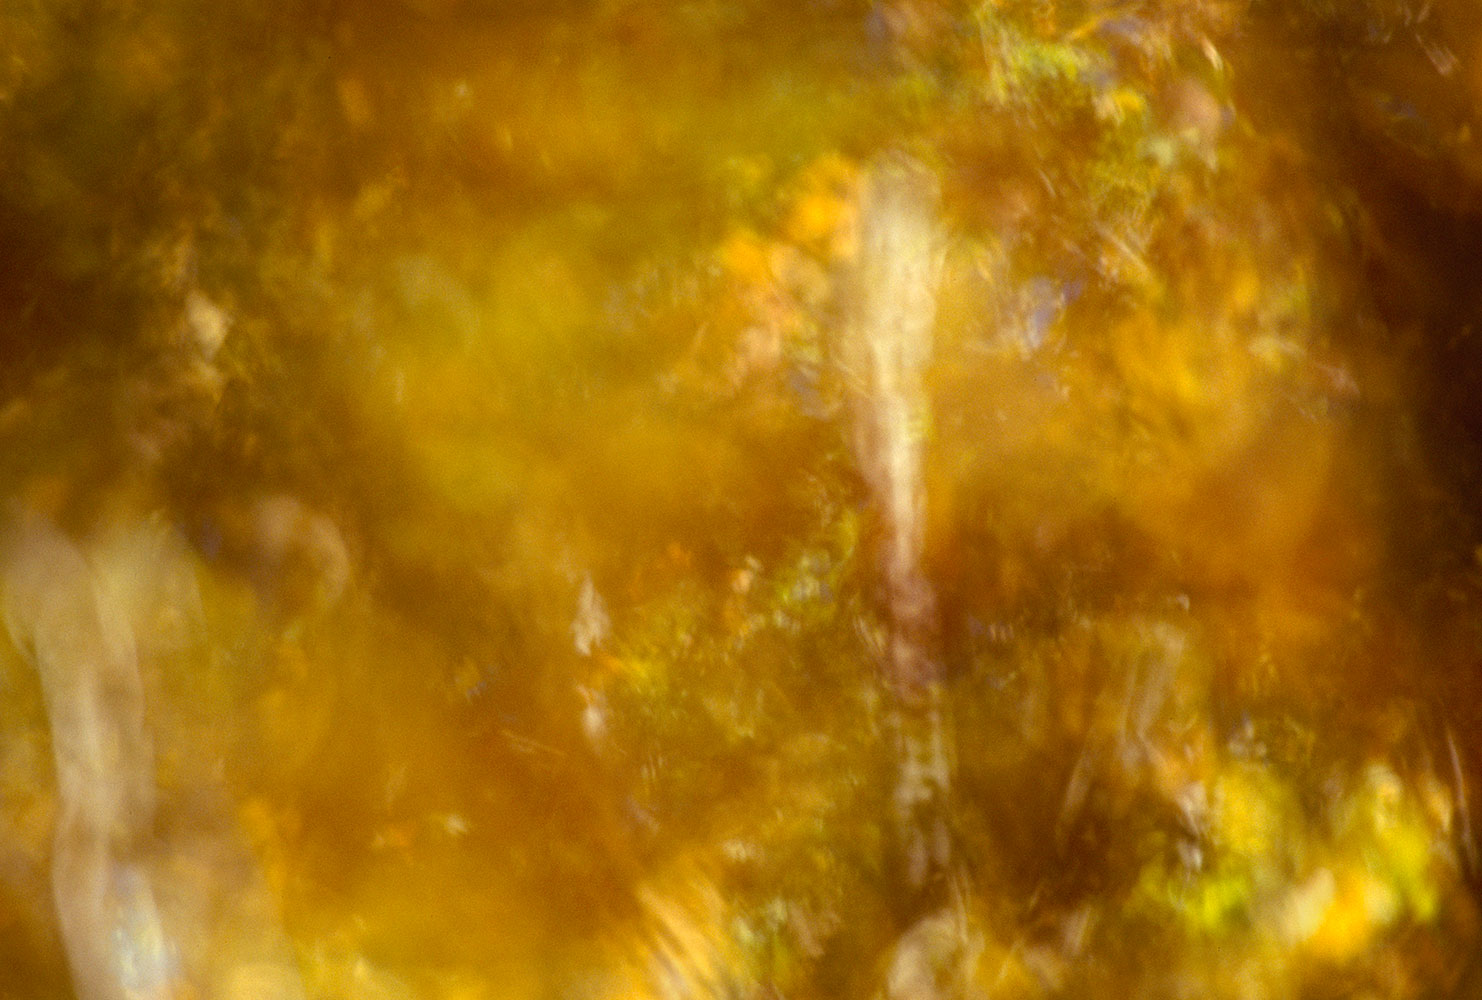 thrall:     autumnal    gold     aspens   season    Fall   equinox  October    western  calm   surrender      abstract-landscape